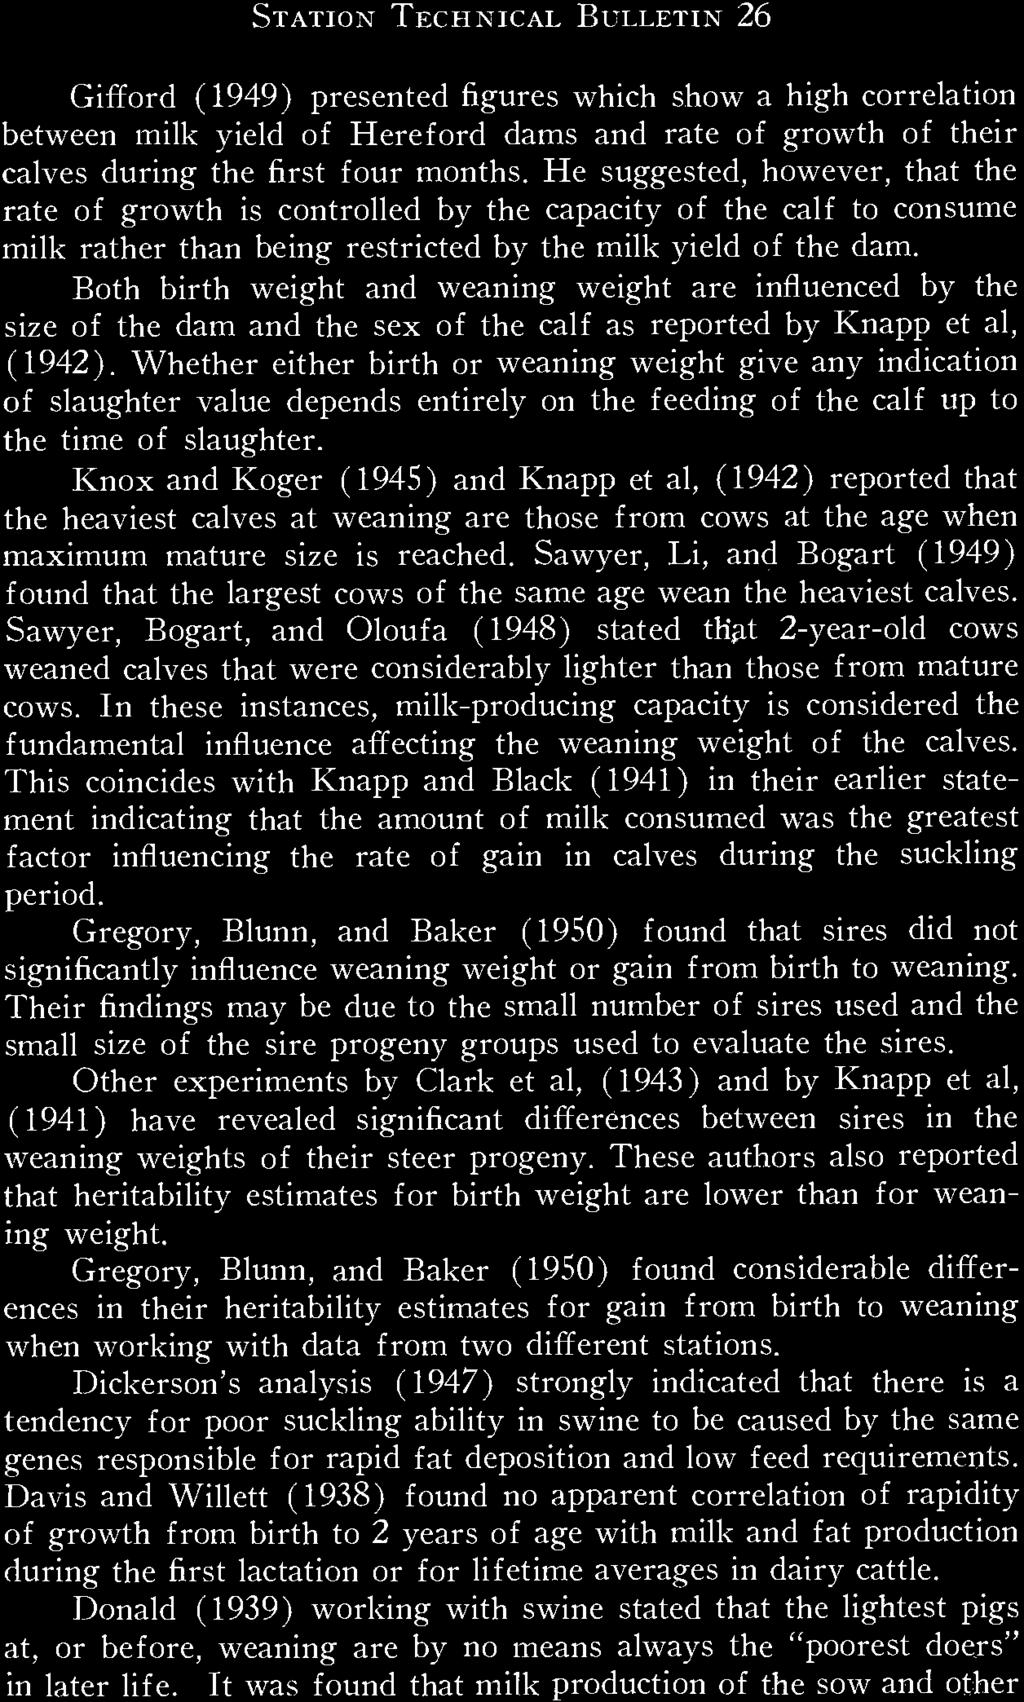 Both birth weight and weaning weight are influenced by the size of the dam and the sex of the calf as reported by Knapp et al, (1942).